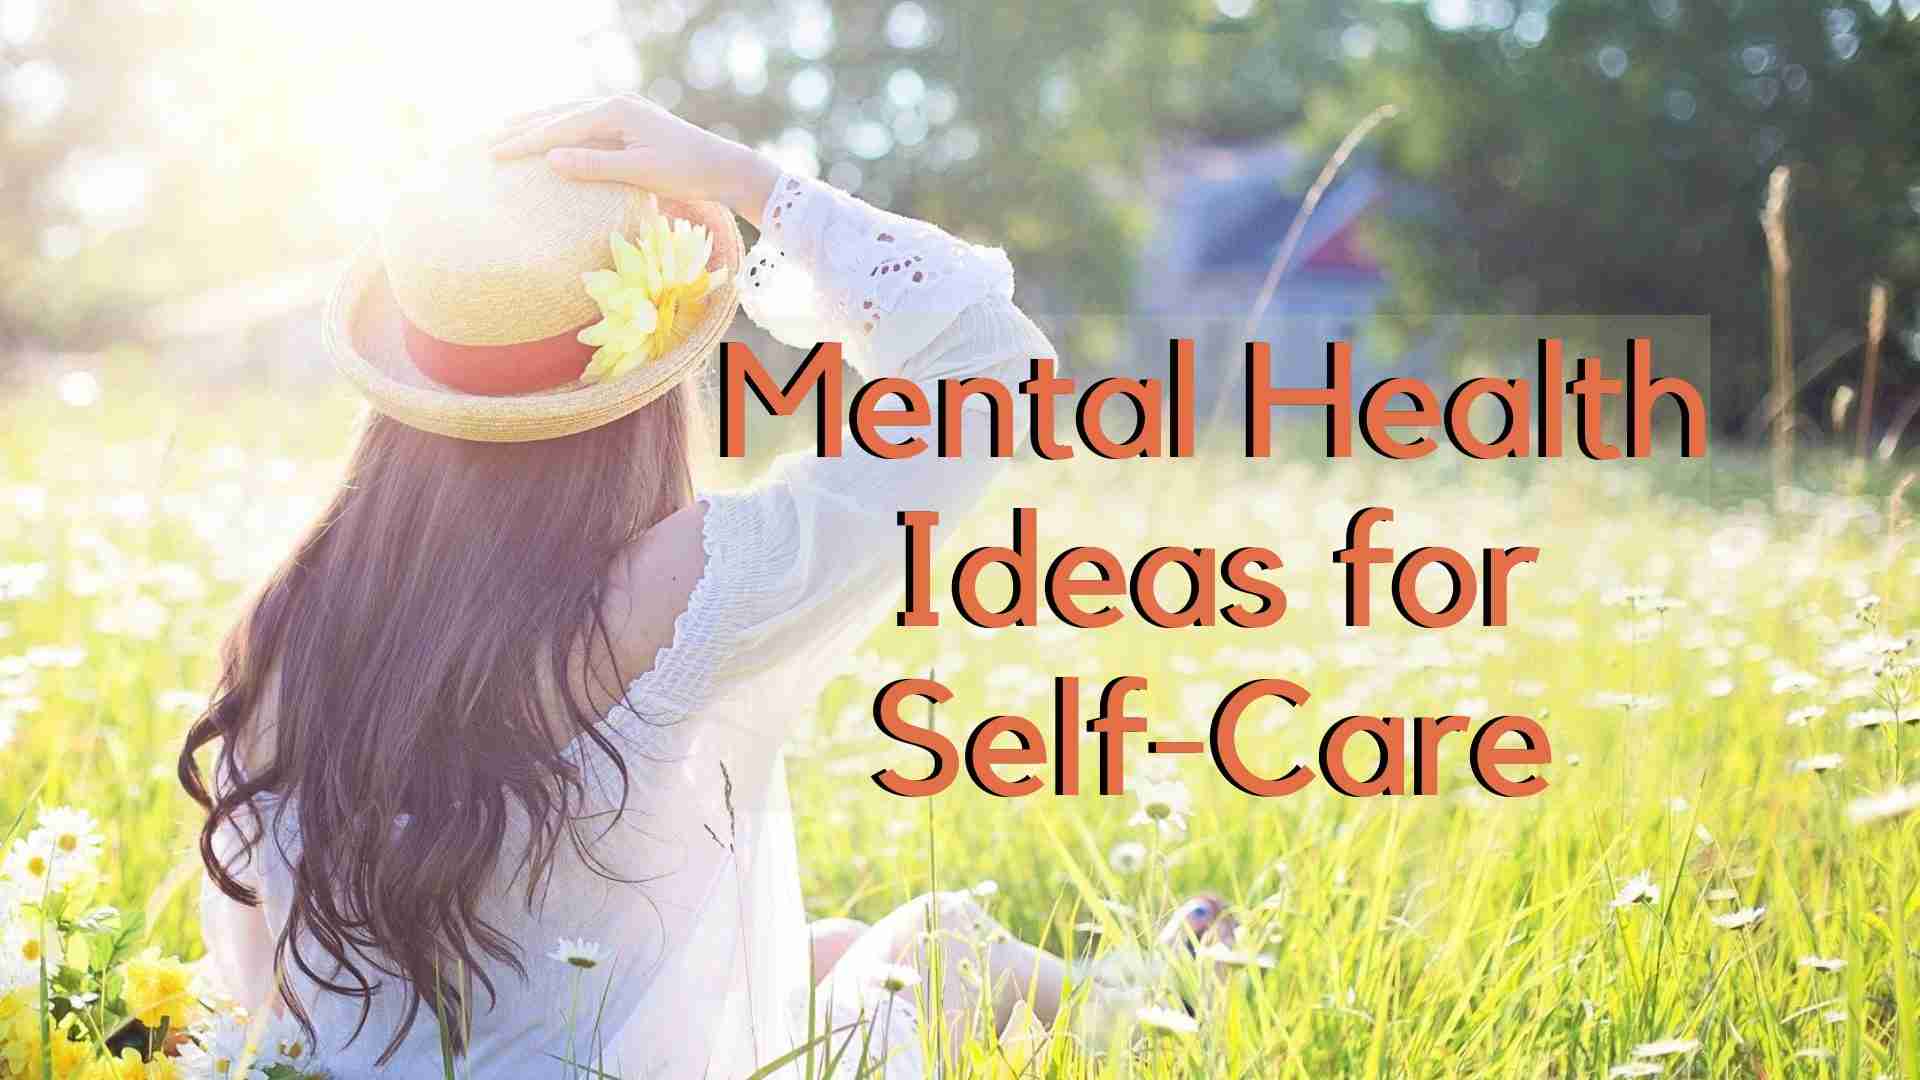 "Mental Health Ideas for Self-Care", Woman with a hat sitting in long grass and sunshine